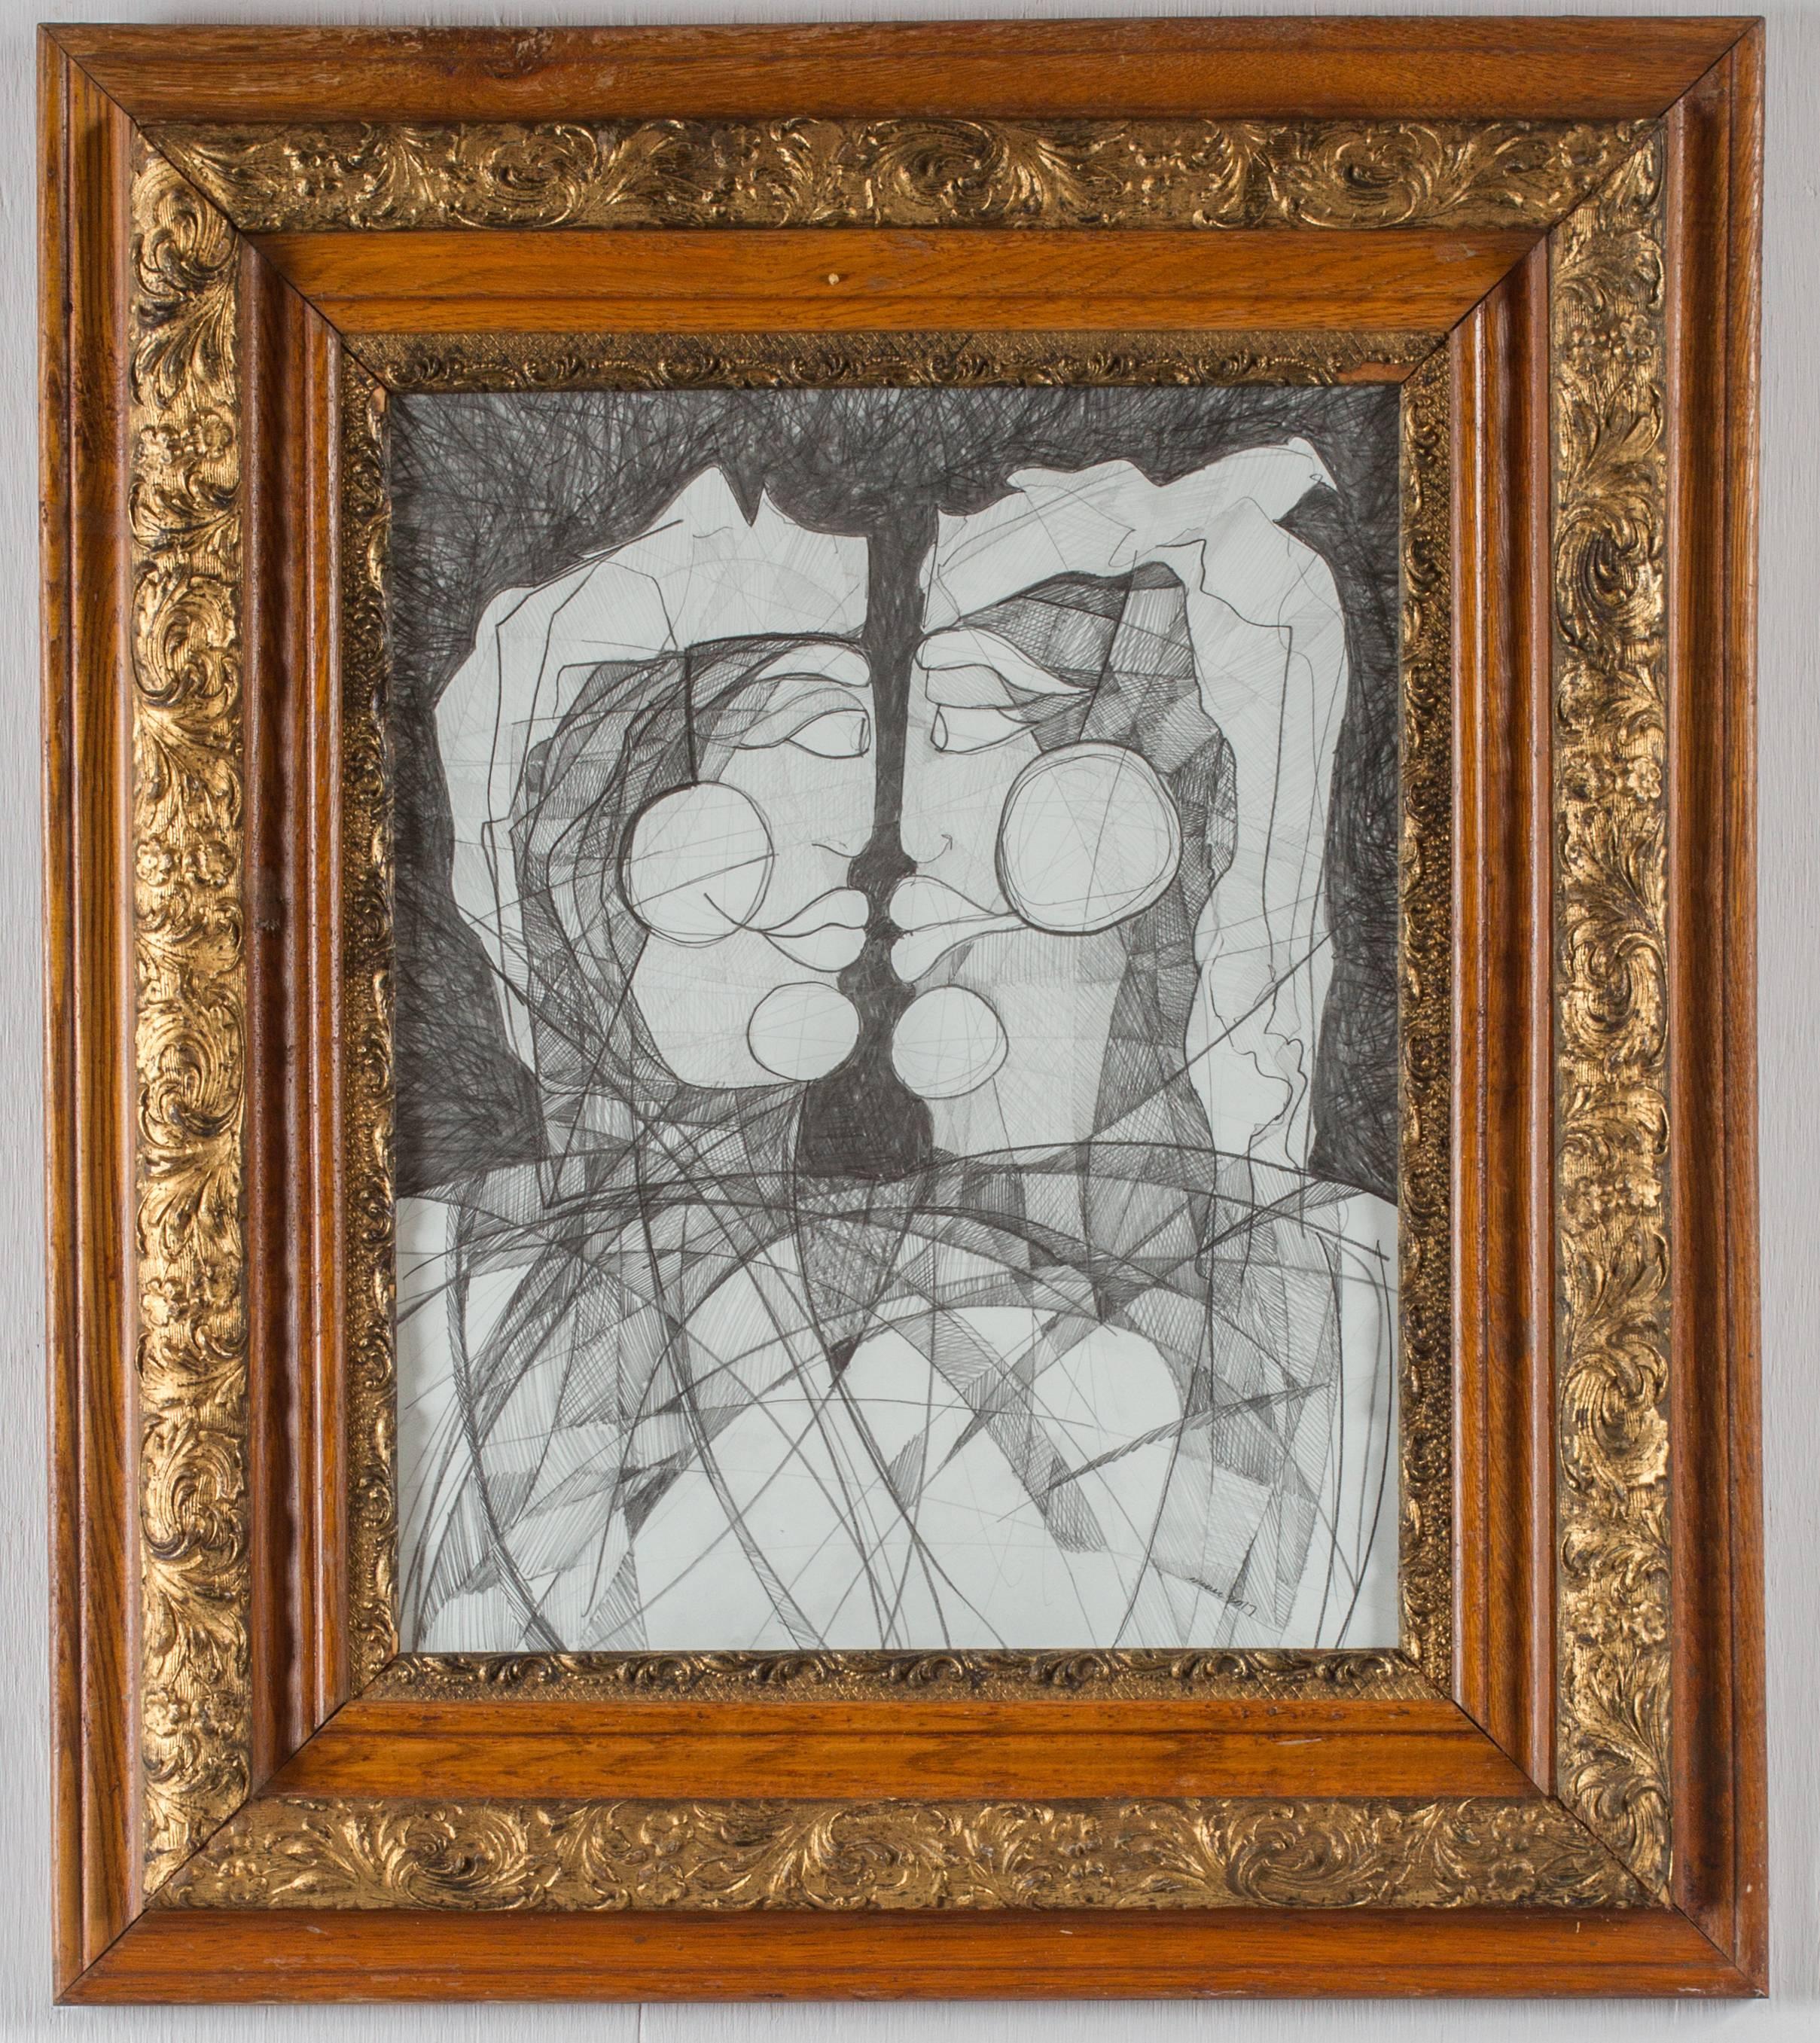 Janus Woman #2 (Abstract Figurative Portrait Drawing on Paper in Antique Frame) - Art by David Dew Bruner